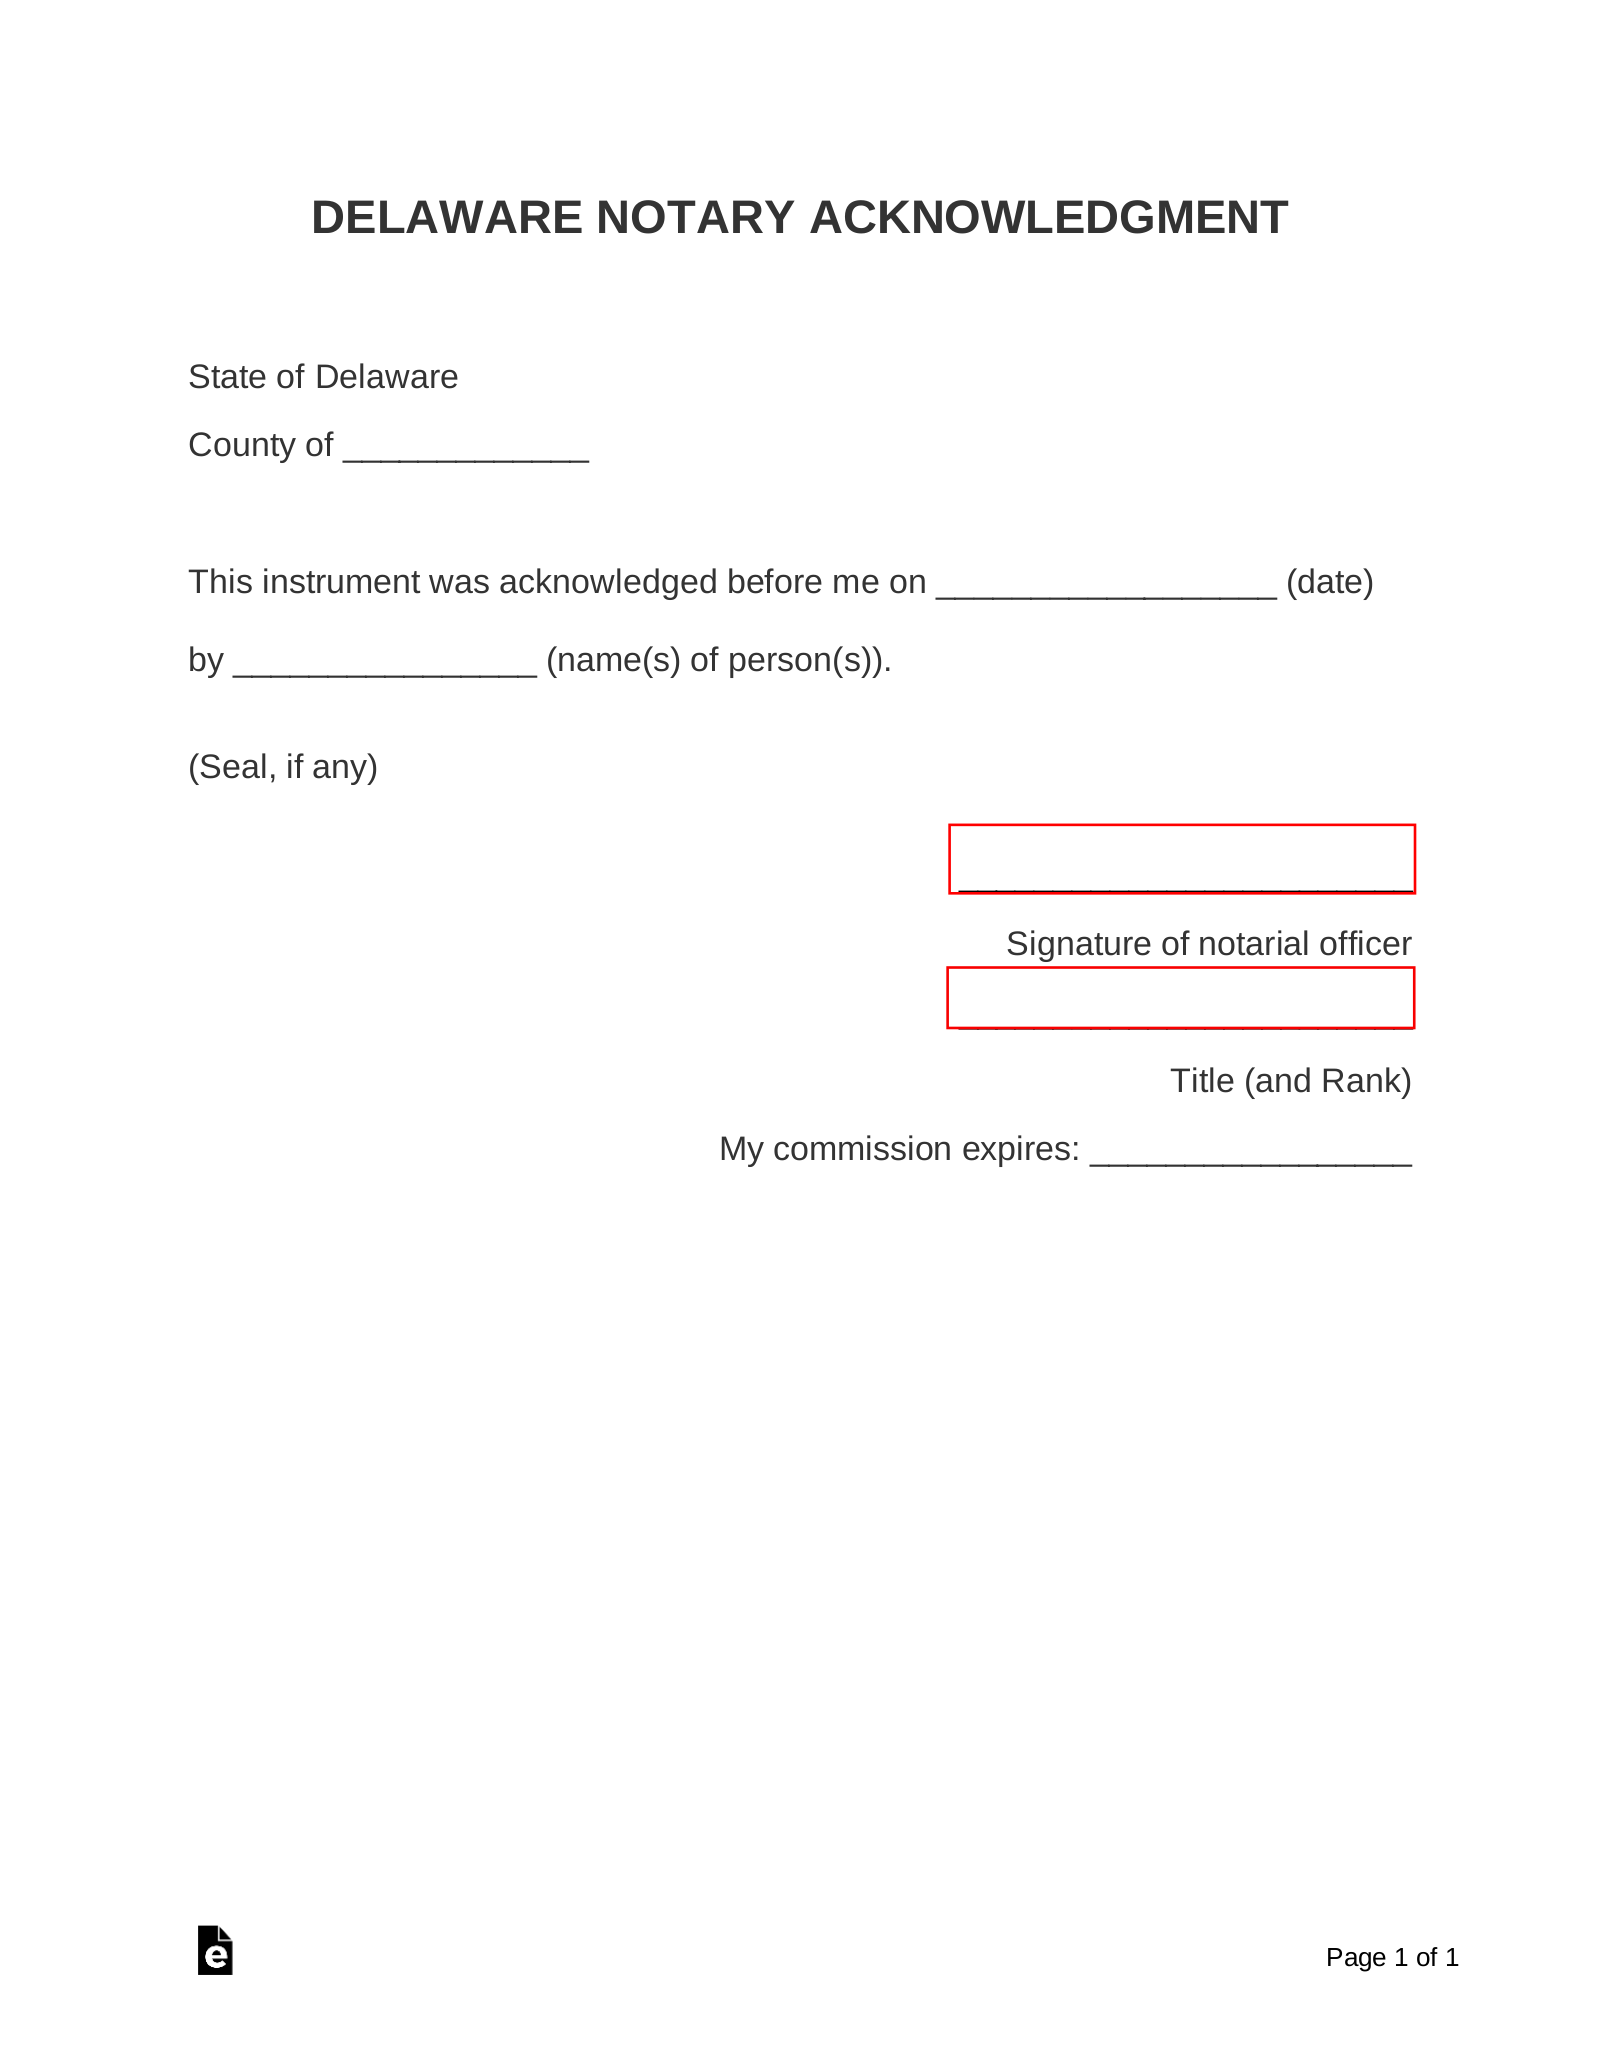 Delaware Notary Acknowledgment Form